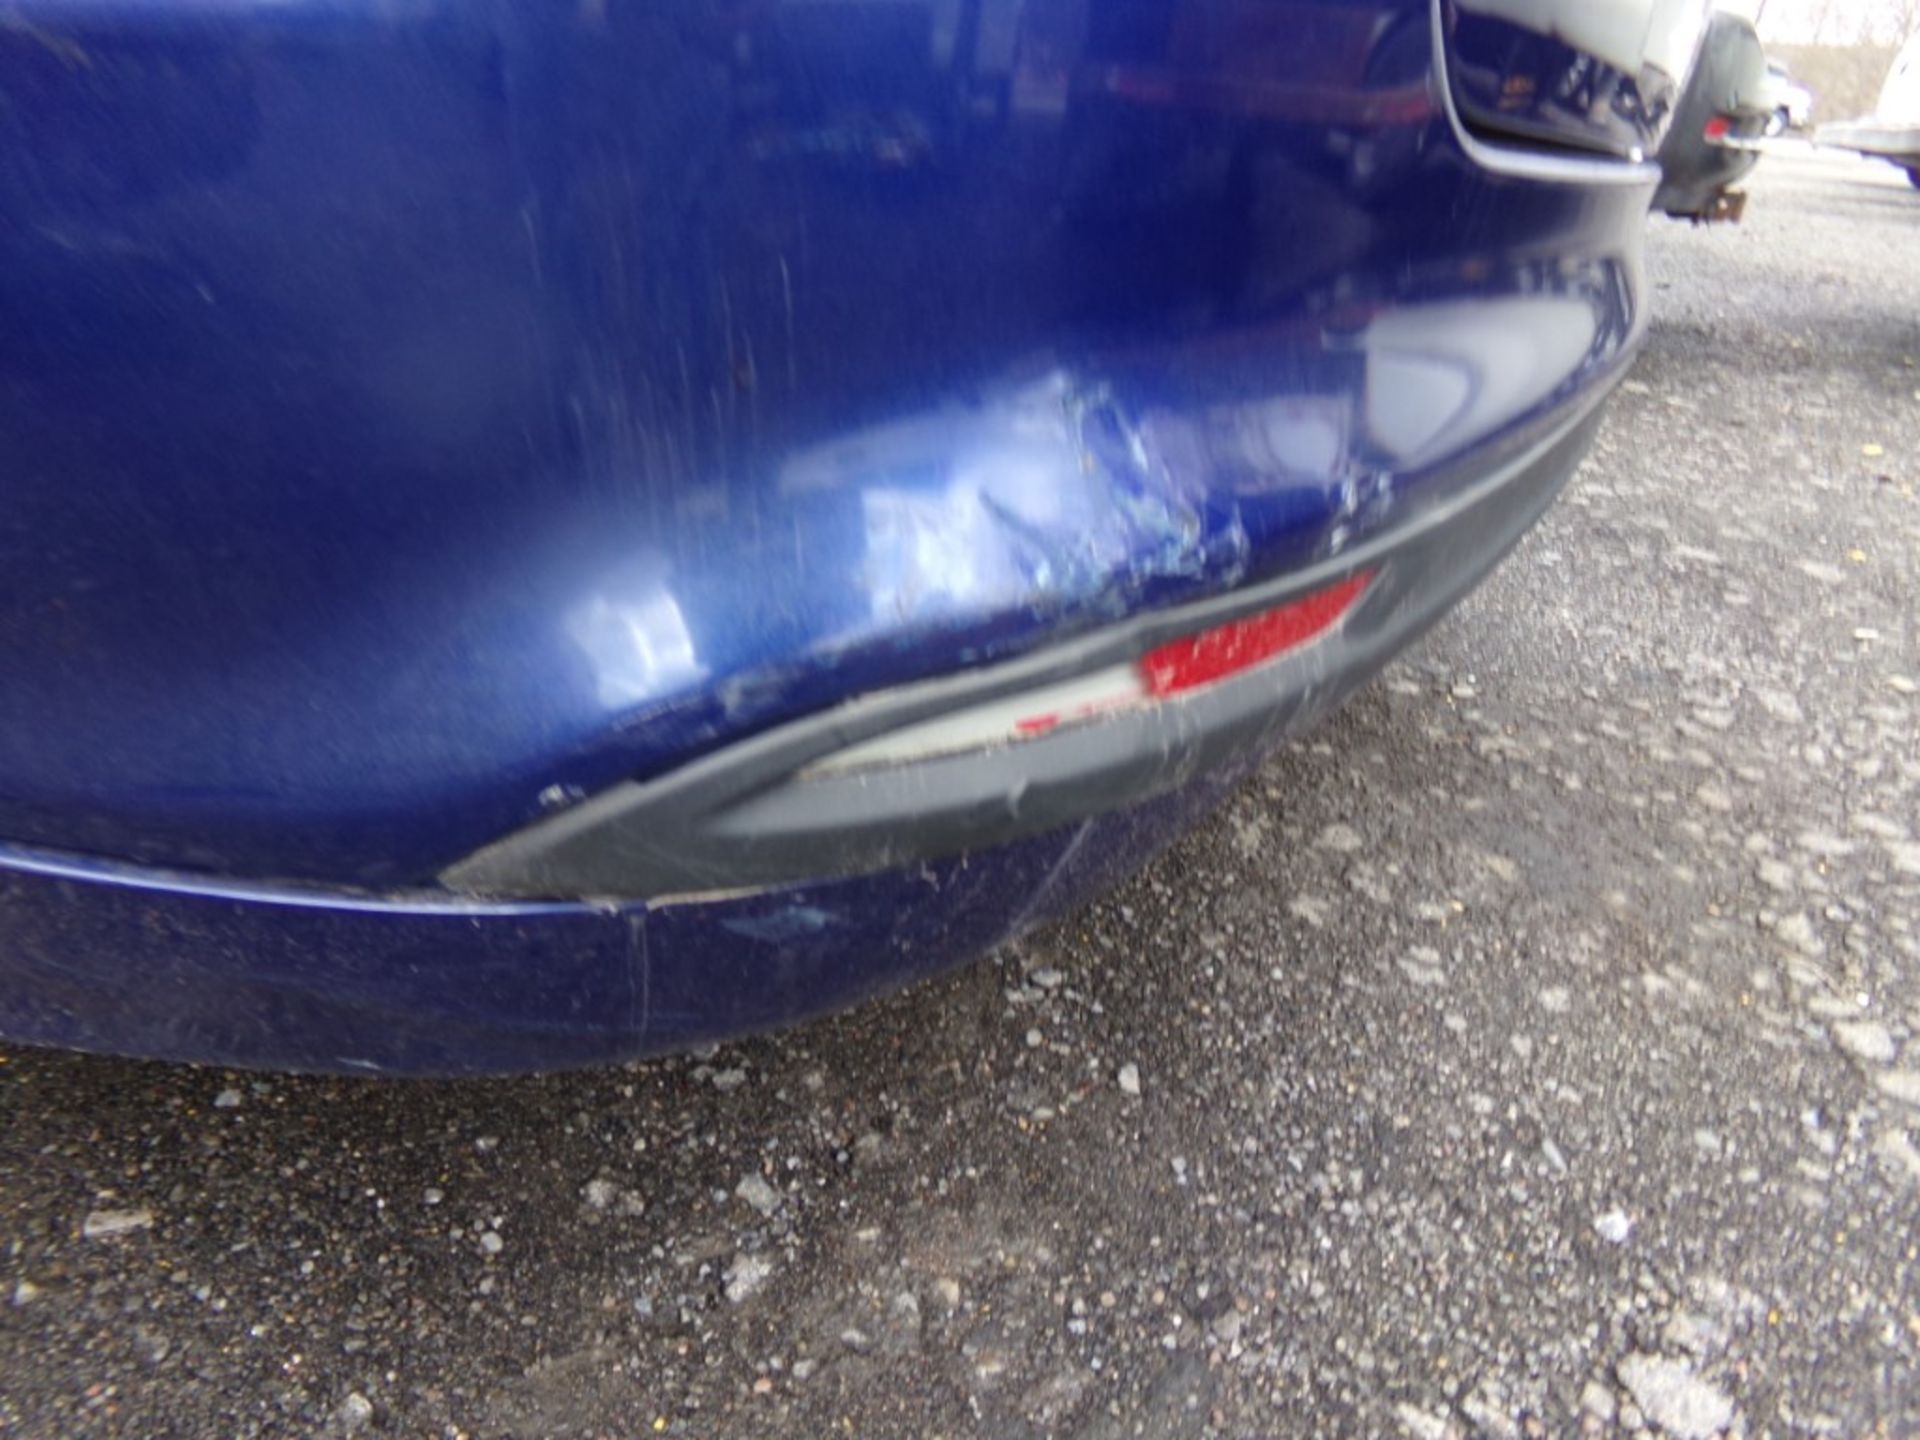 2014 Ford Fusion SE, Blue, 174,739 Miles, VIN#1FA6P0H7XE5365423, AIR BAG LIGHT IS ON, MINOR DAMAGE - Image 12 of 18